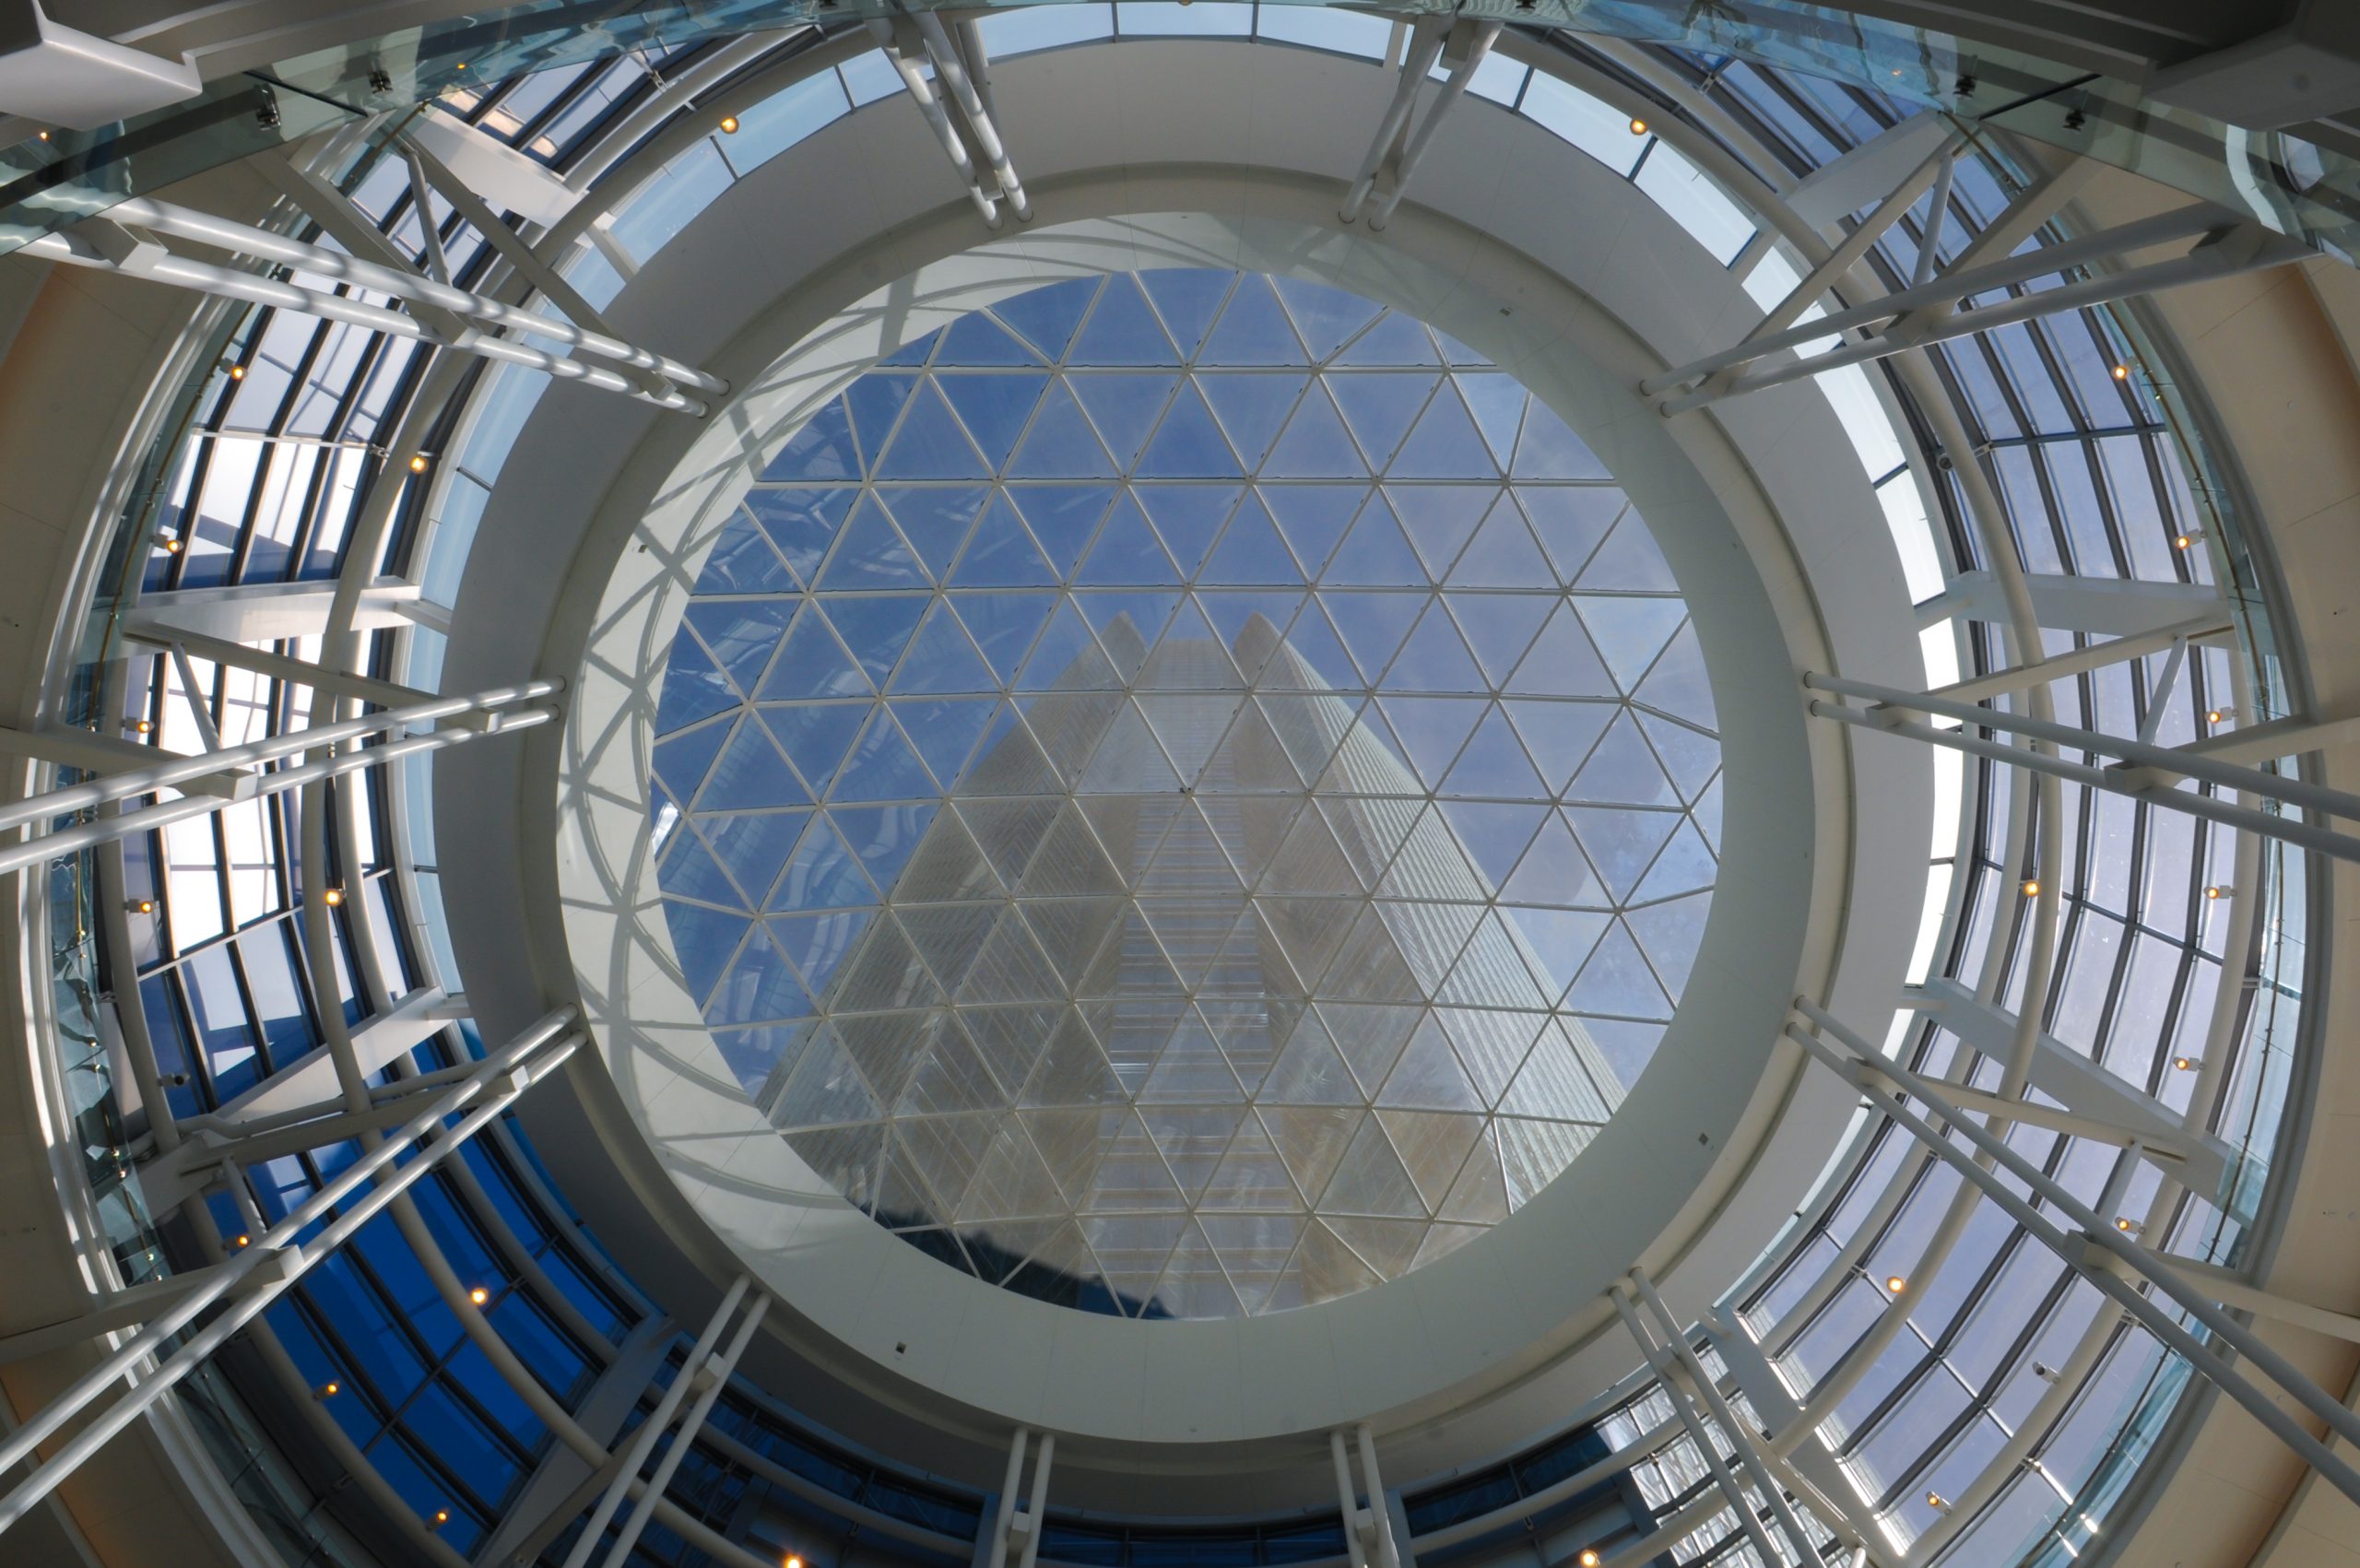 Large circular structure with glass skylight